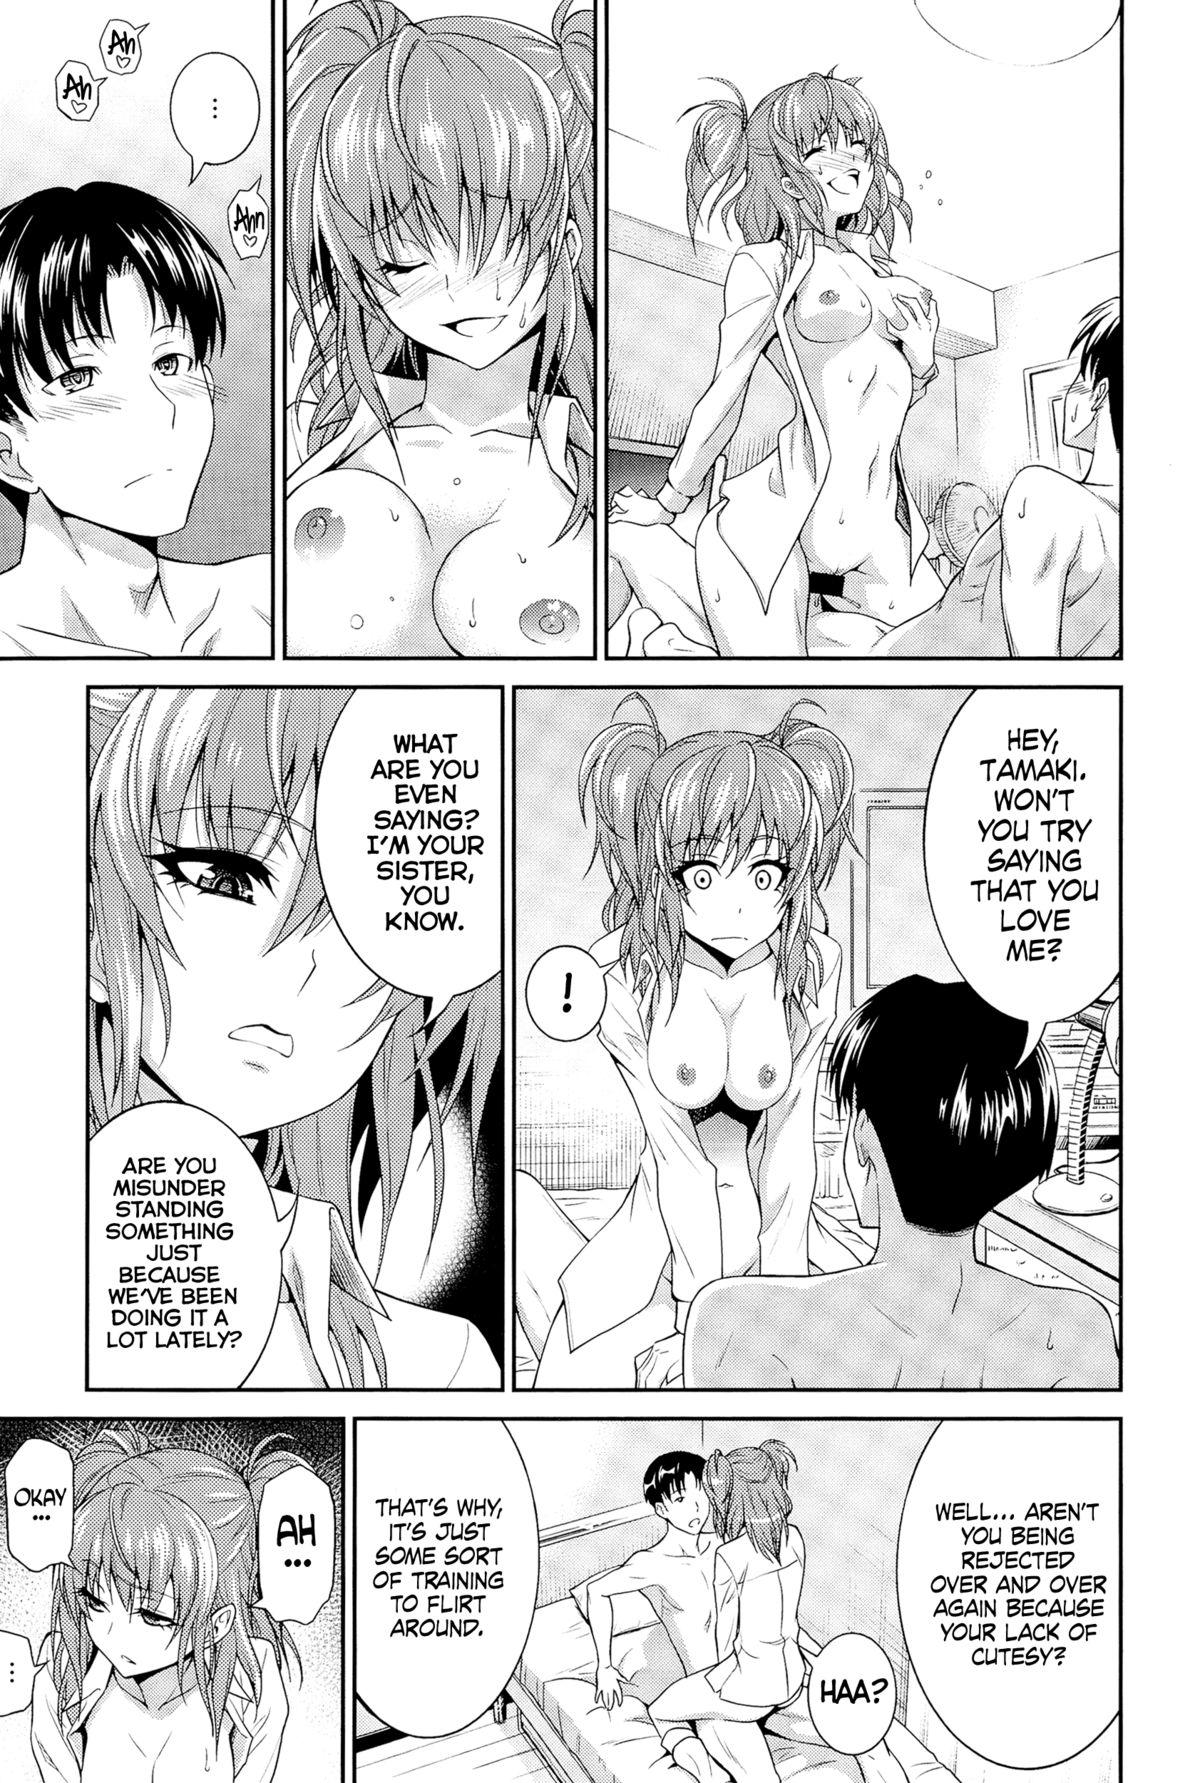 Chinese Imouto no Iiwake | Sister's Excuse Interacial - Page 11